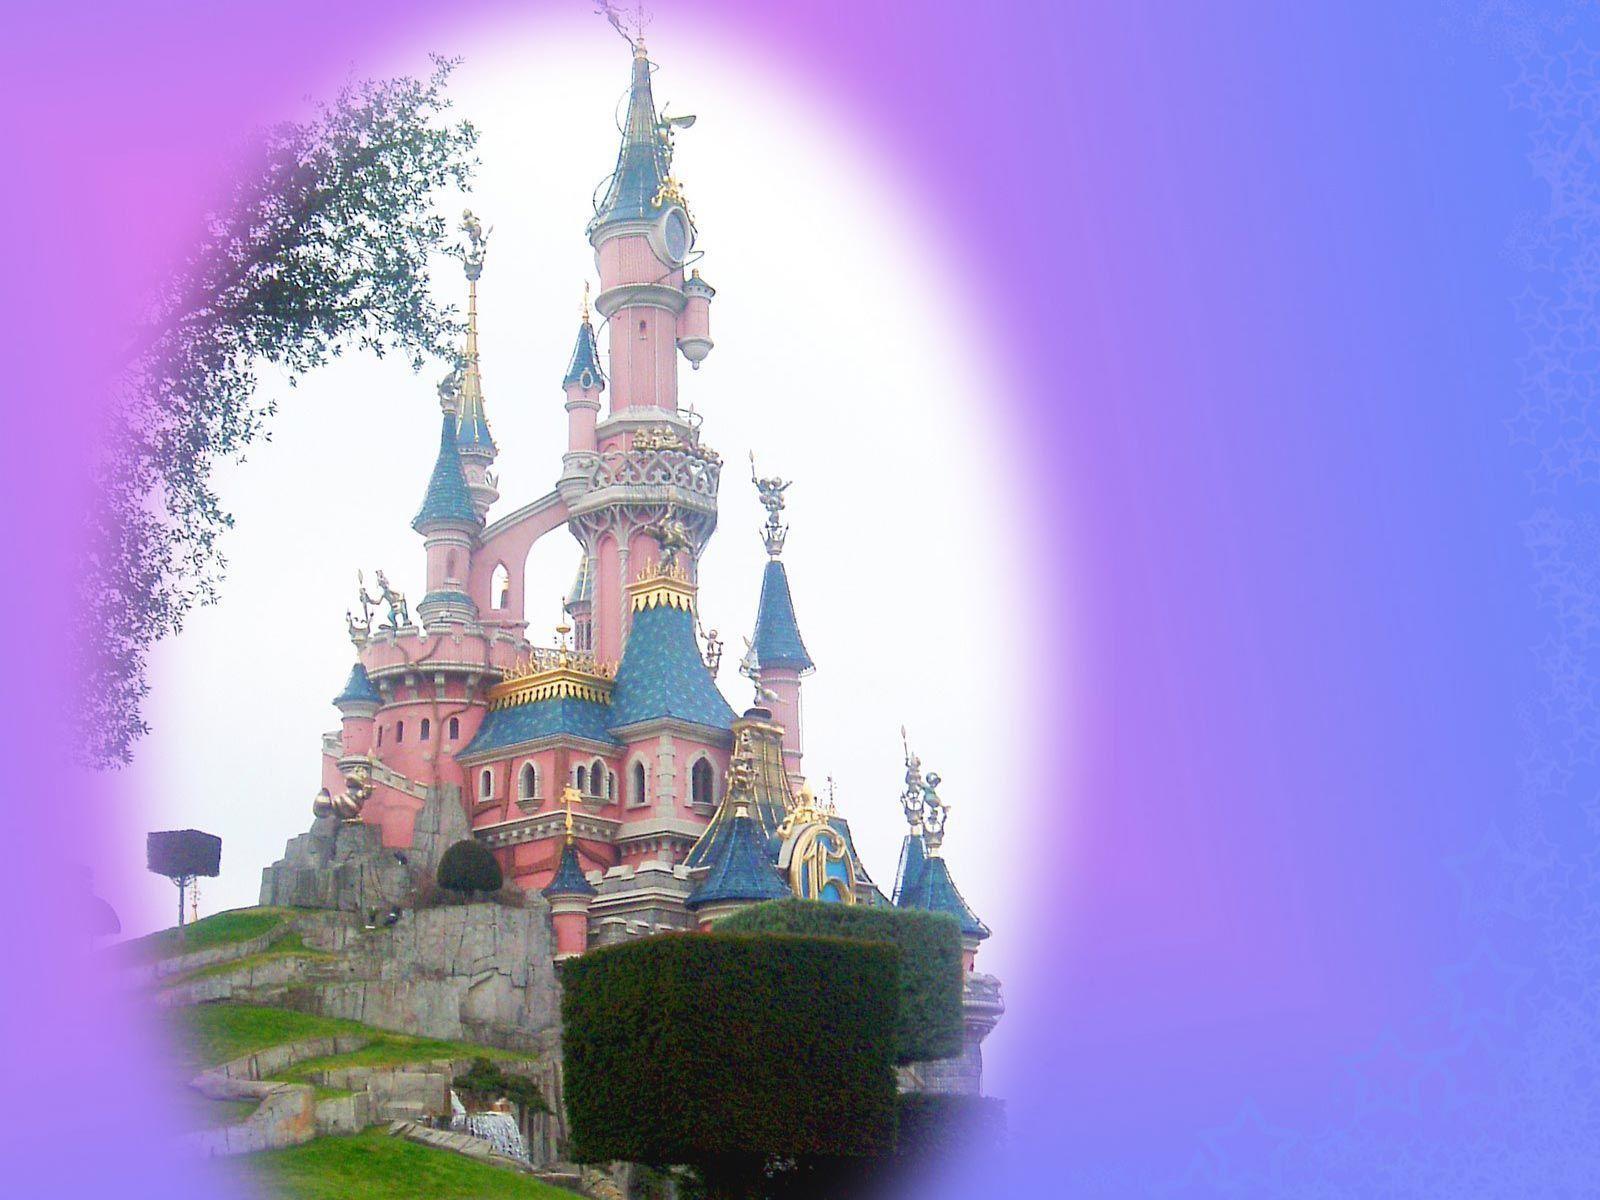 Known places: Disney Castle, created by visionFez, picture nr. 37933